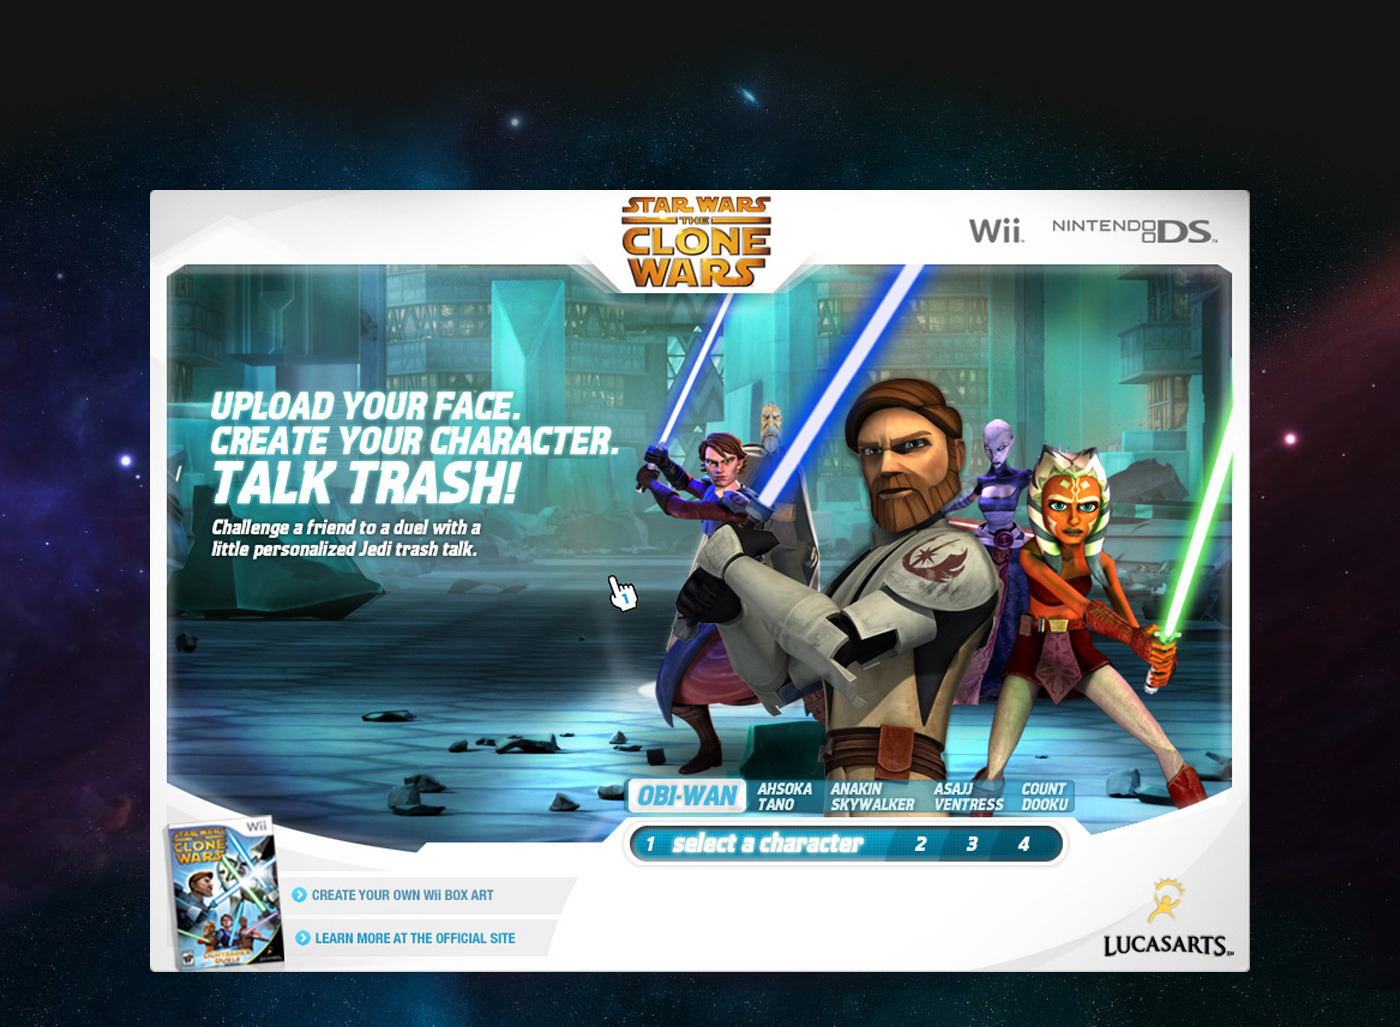 clone wars star wars microsite tfu the force Gaming video game wii DS Nintendo